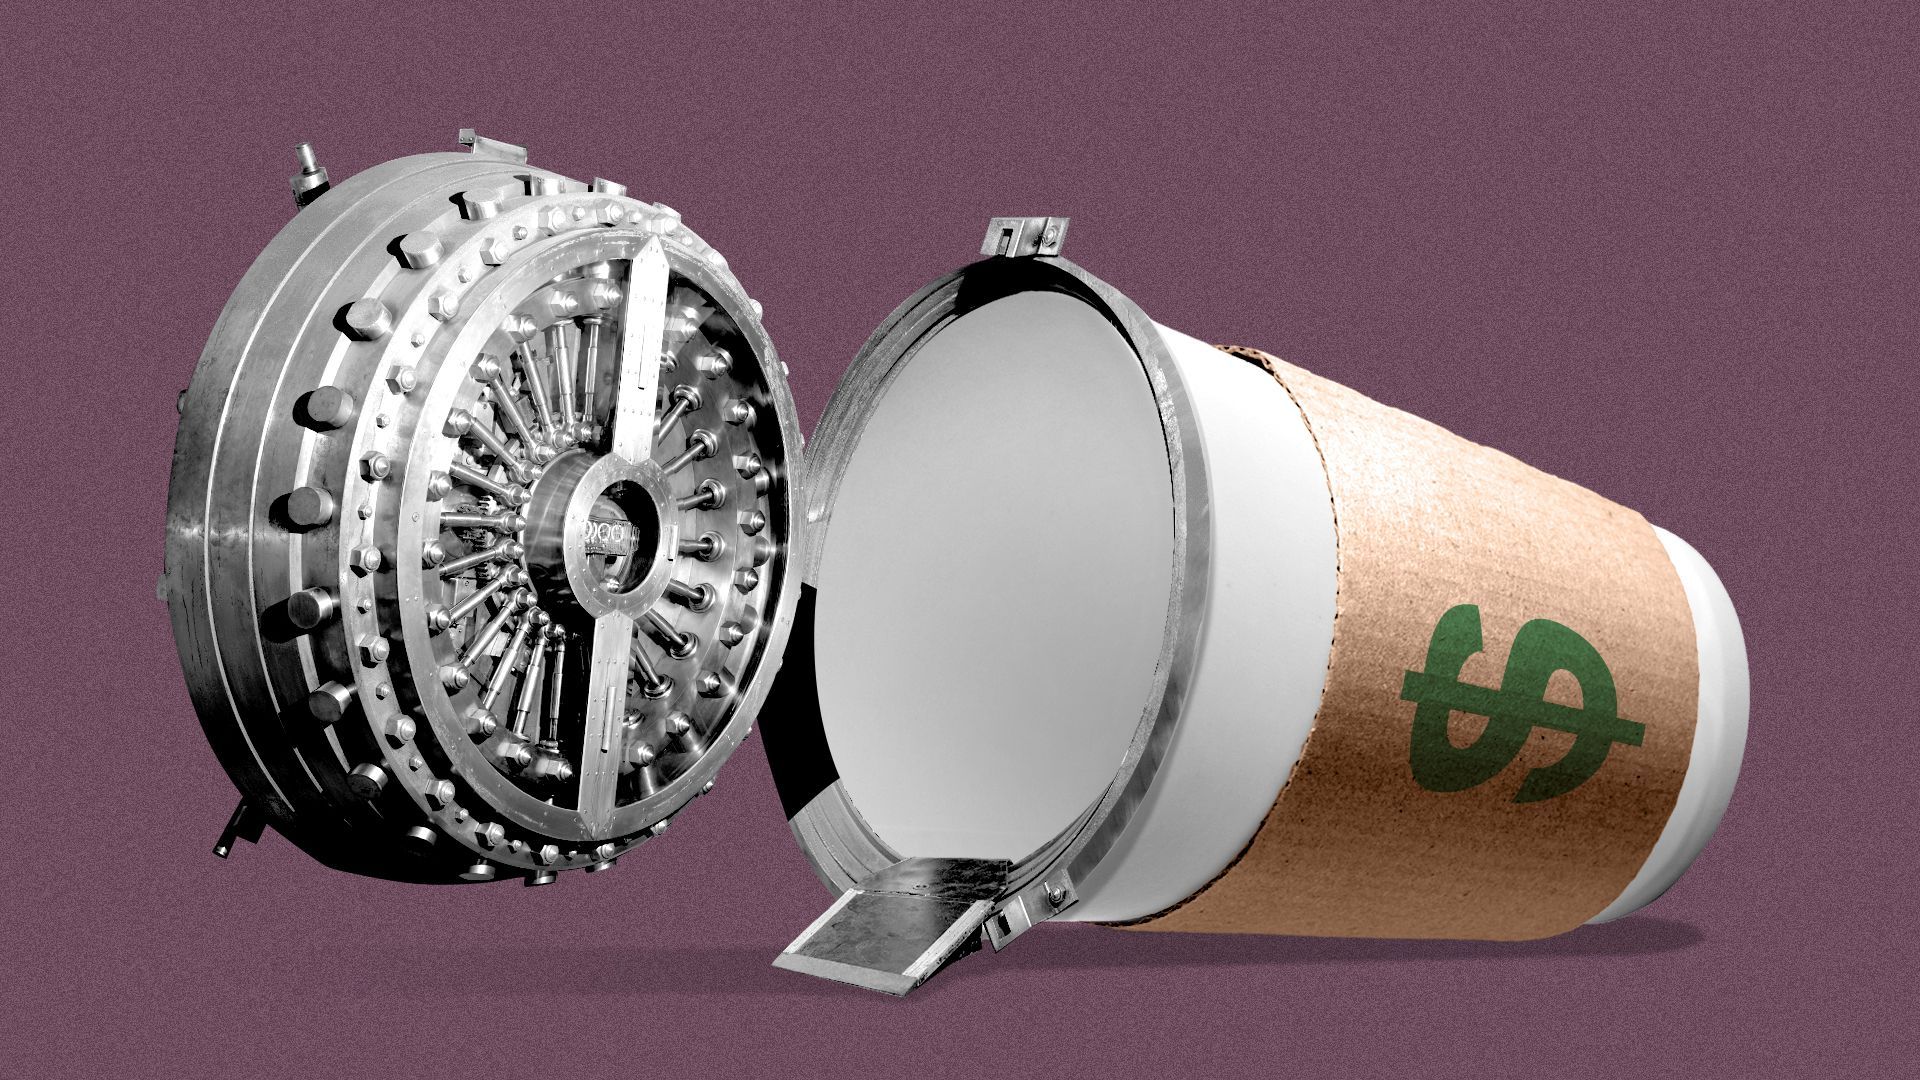 Illustration of a coffee cup with a bank vault for a lid.